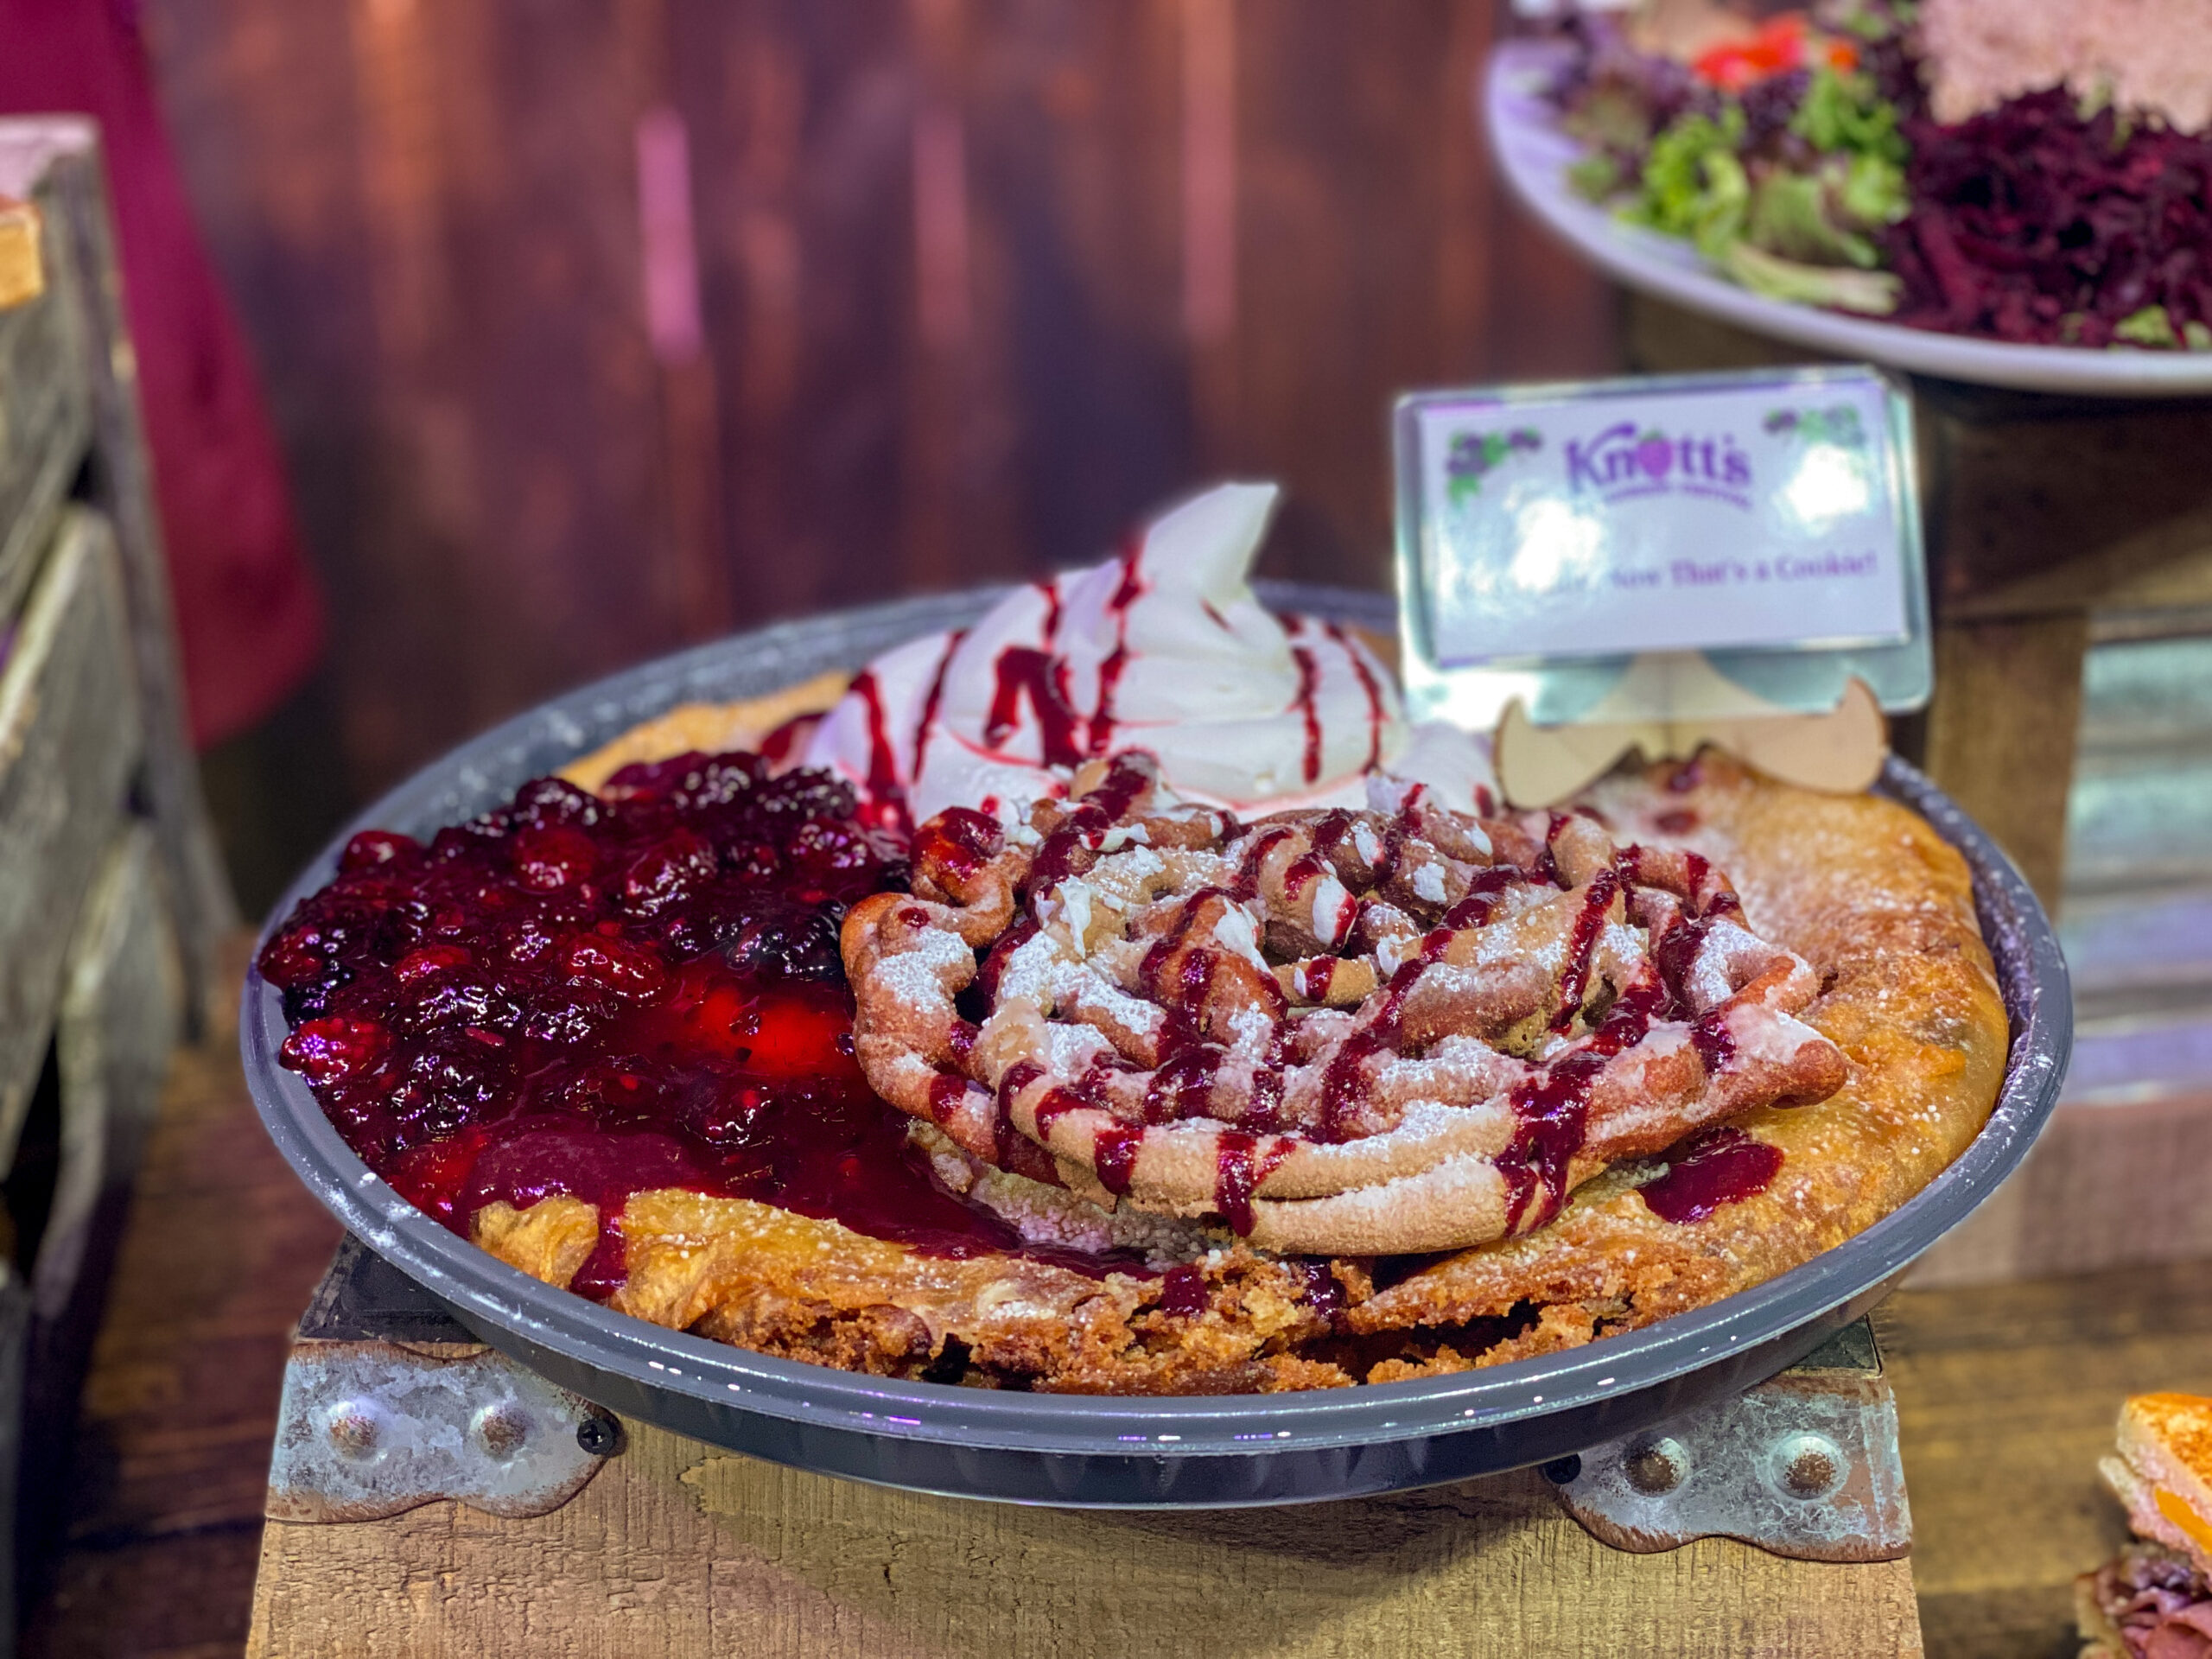 Delicious First Look! Knotts Boysenberry Festival 2022 is Back